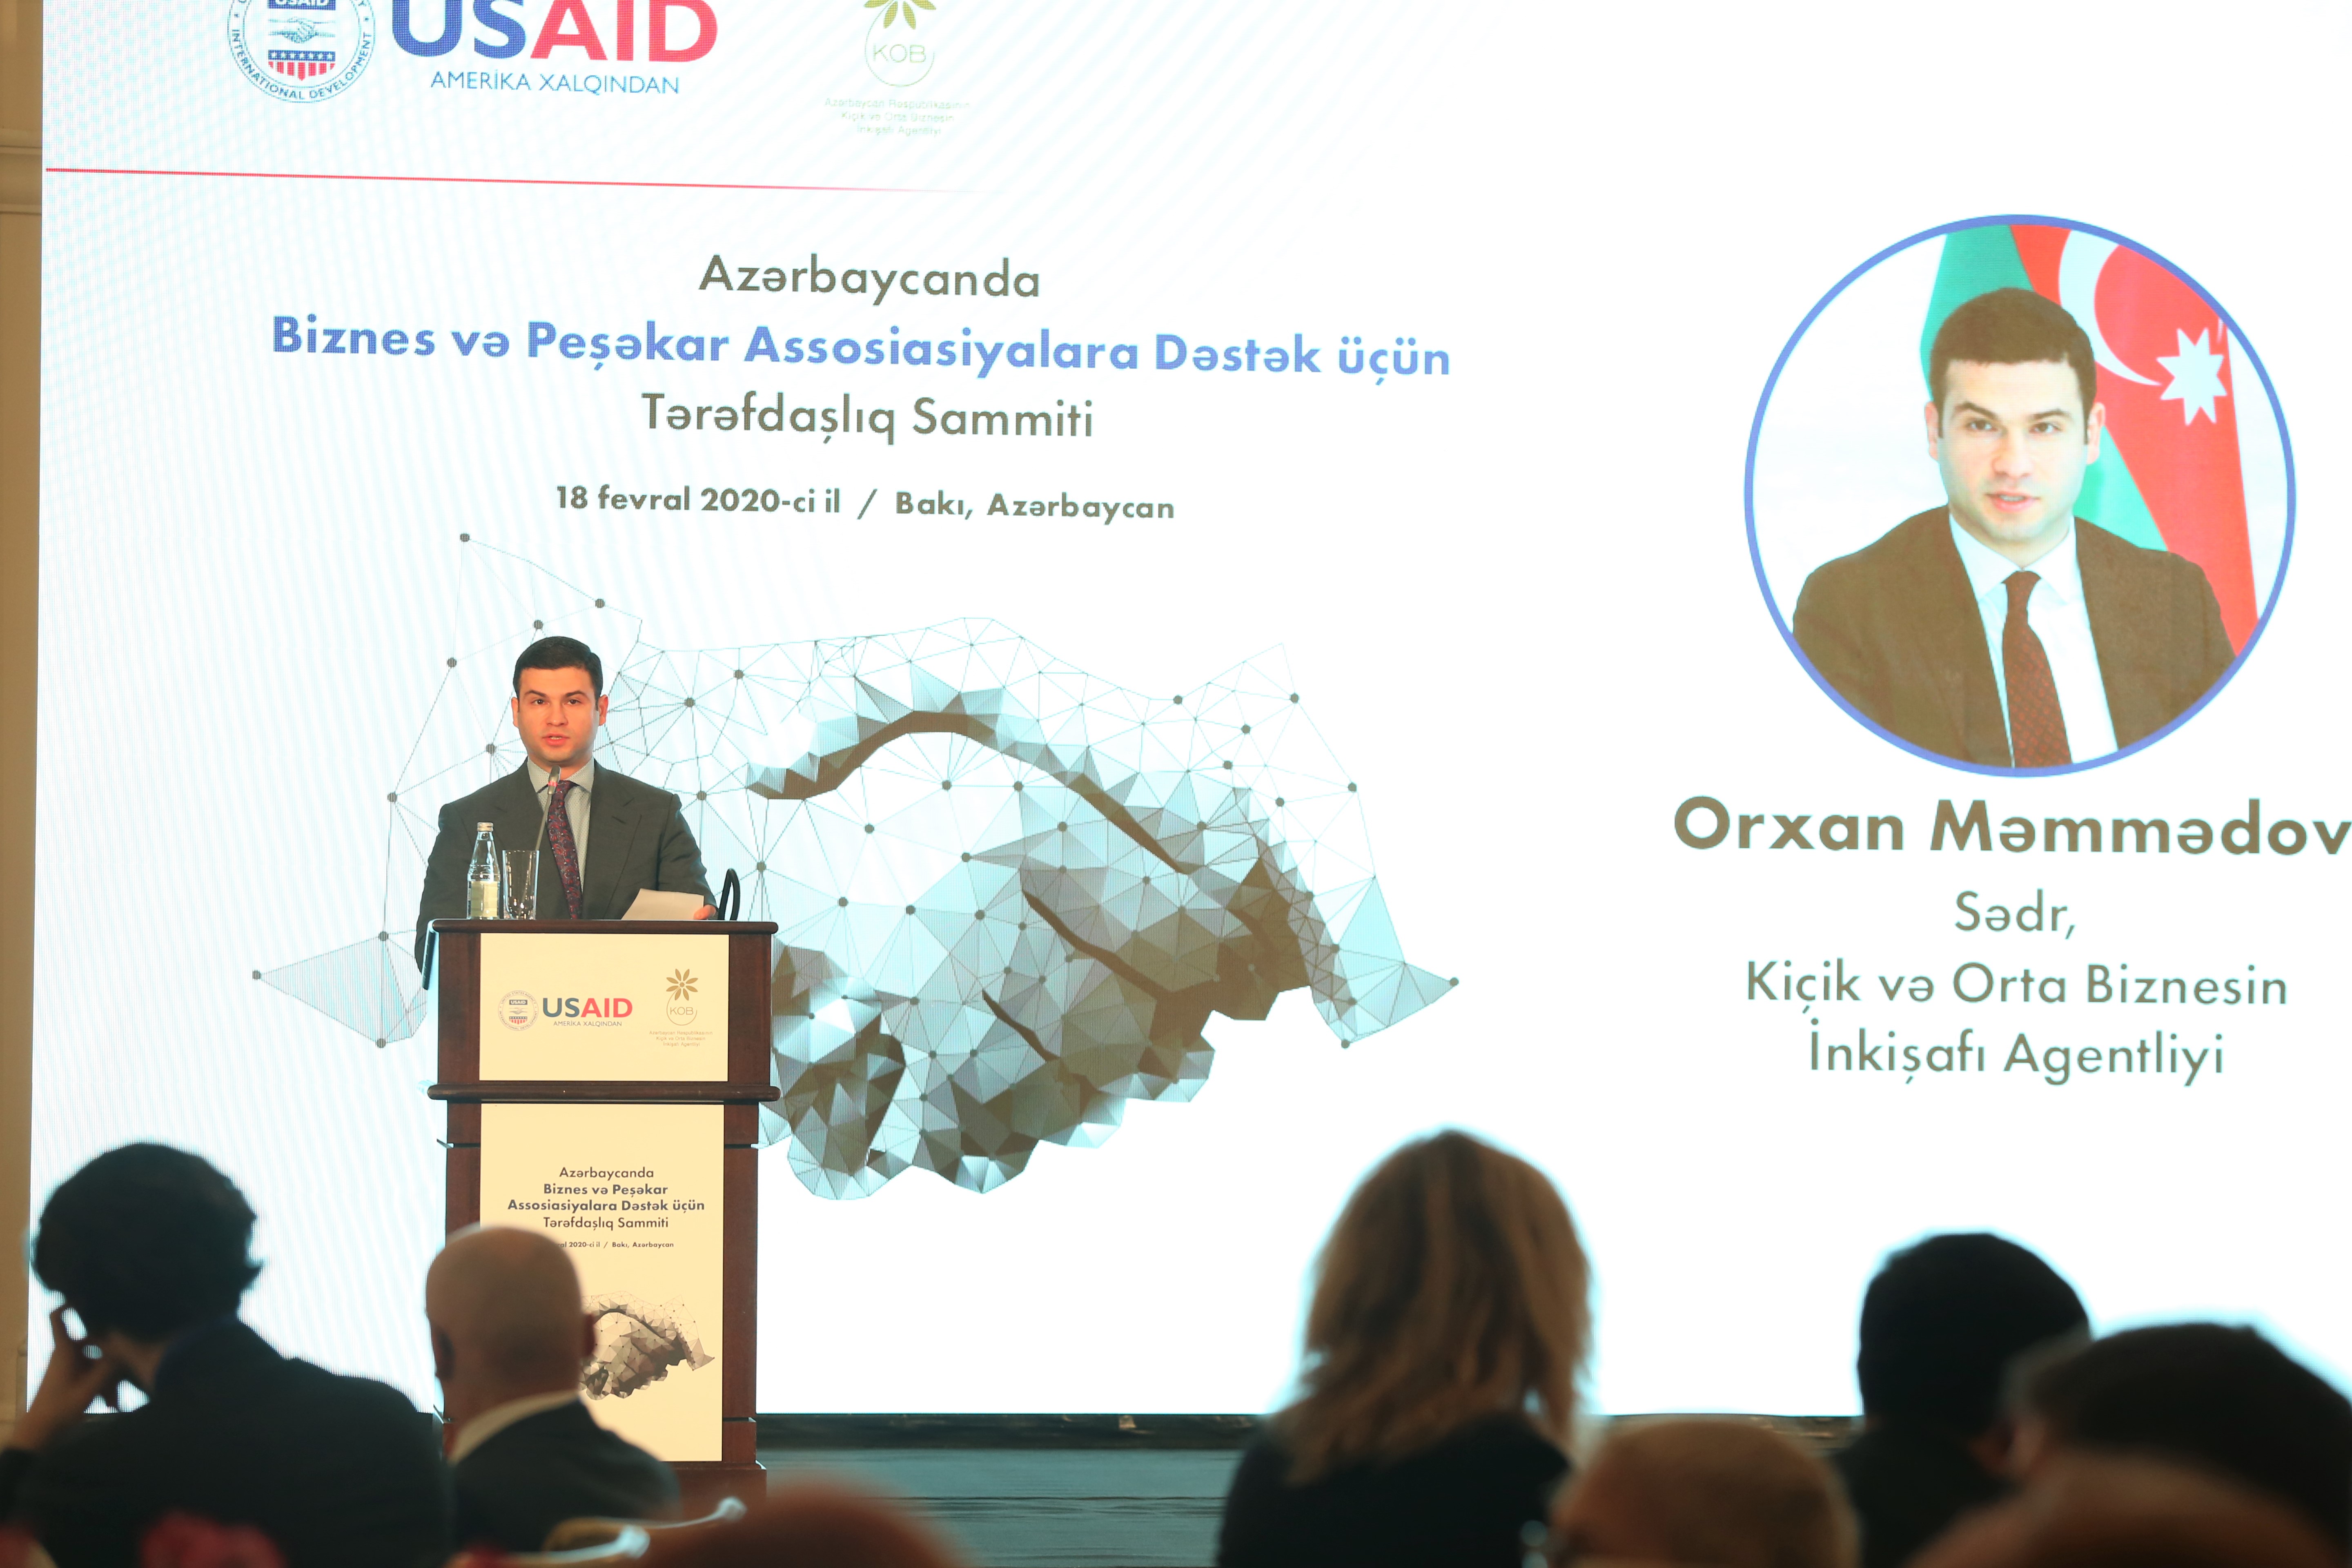 SMBDA and USAID launched a new initiative to support business associations 